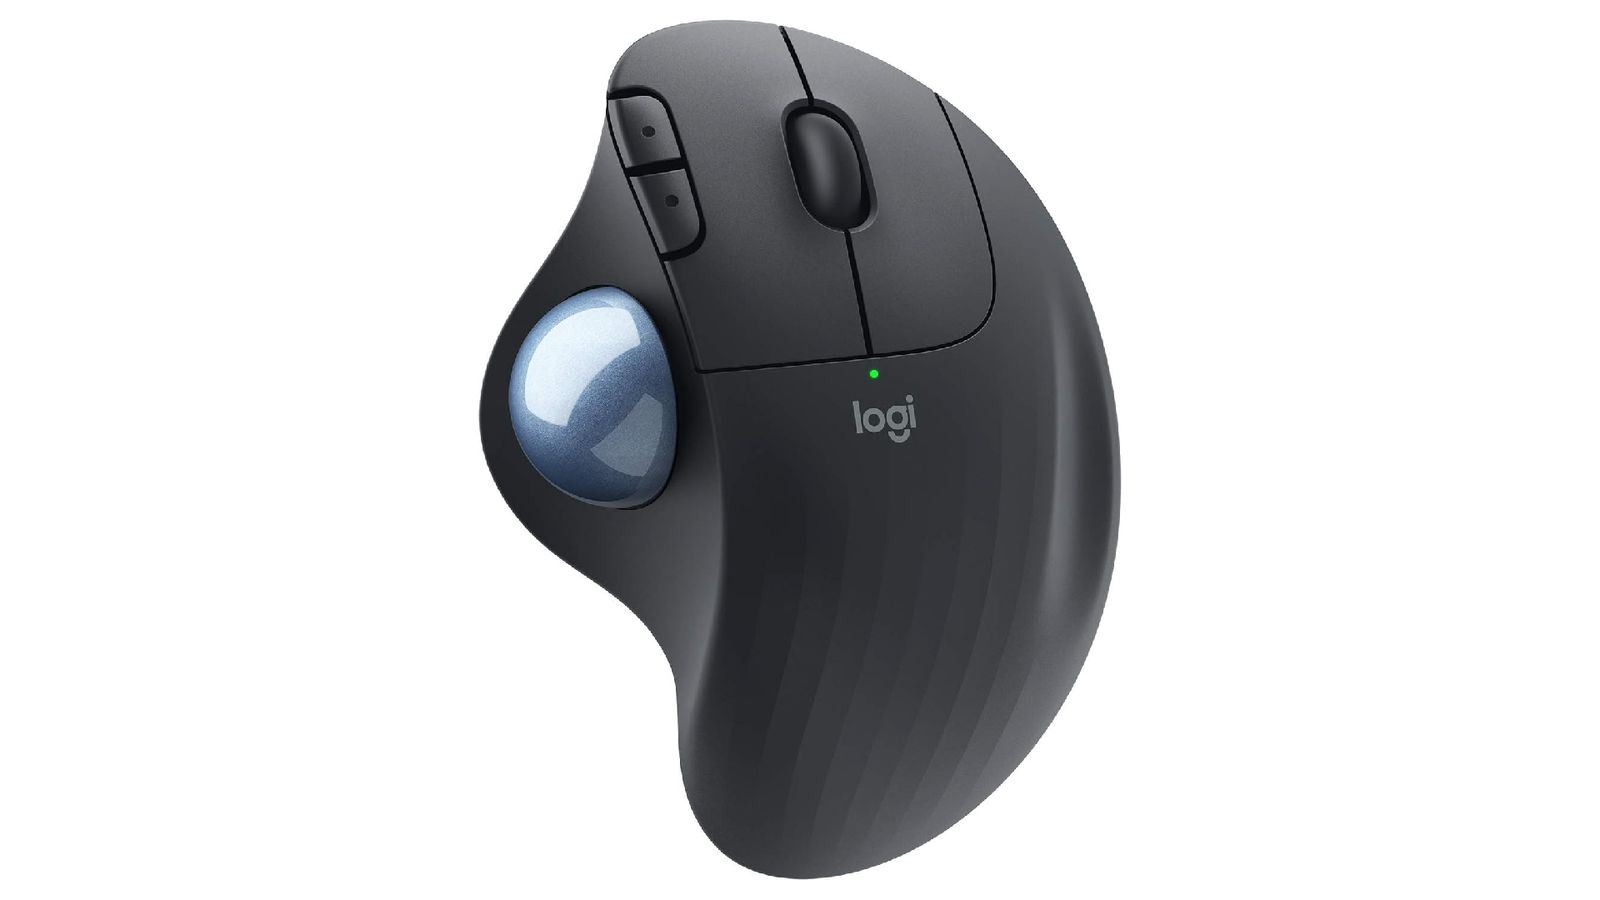 Logitech Ergo M575 product image of a graphite, curved mouse featuring a blue trackball on the left side.